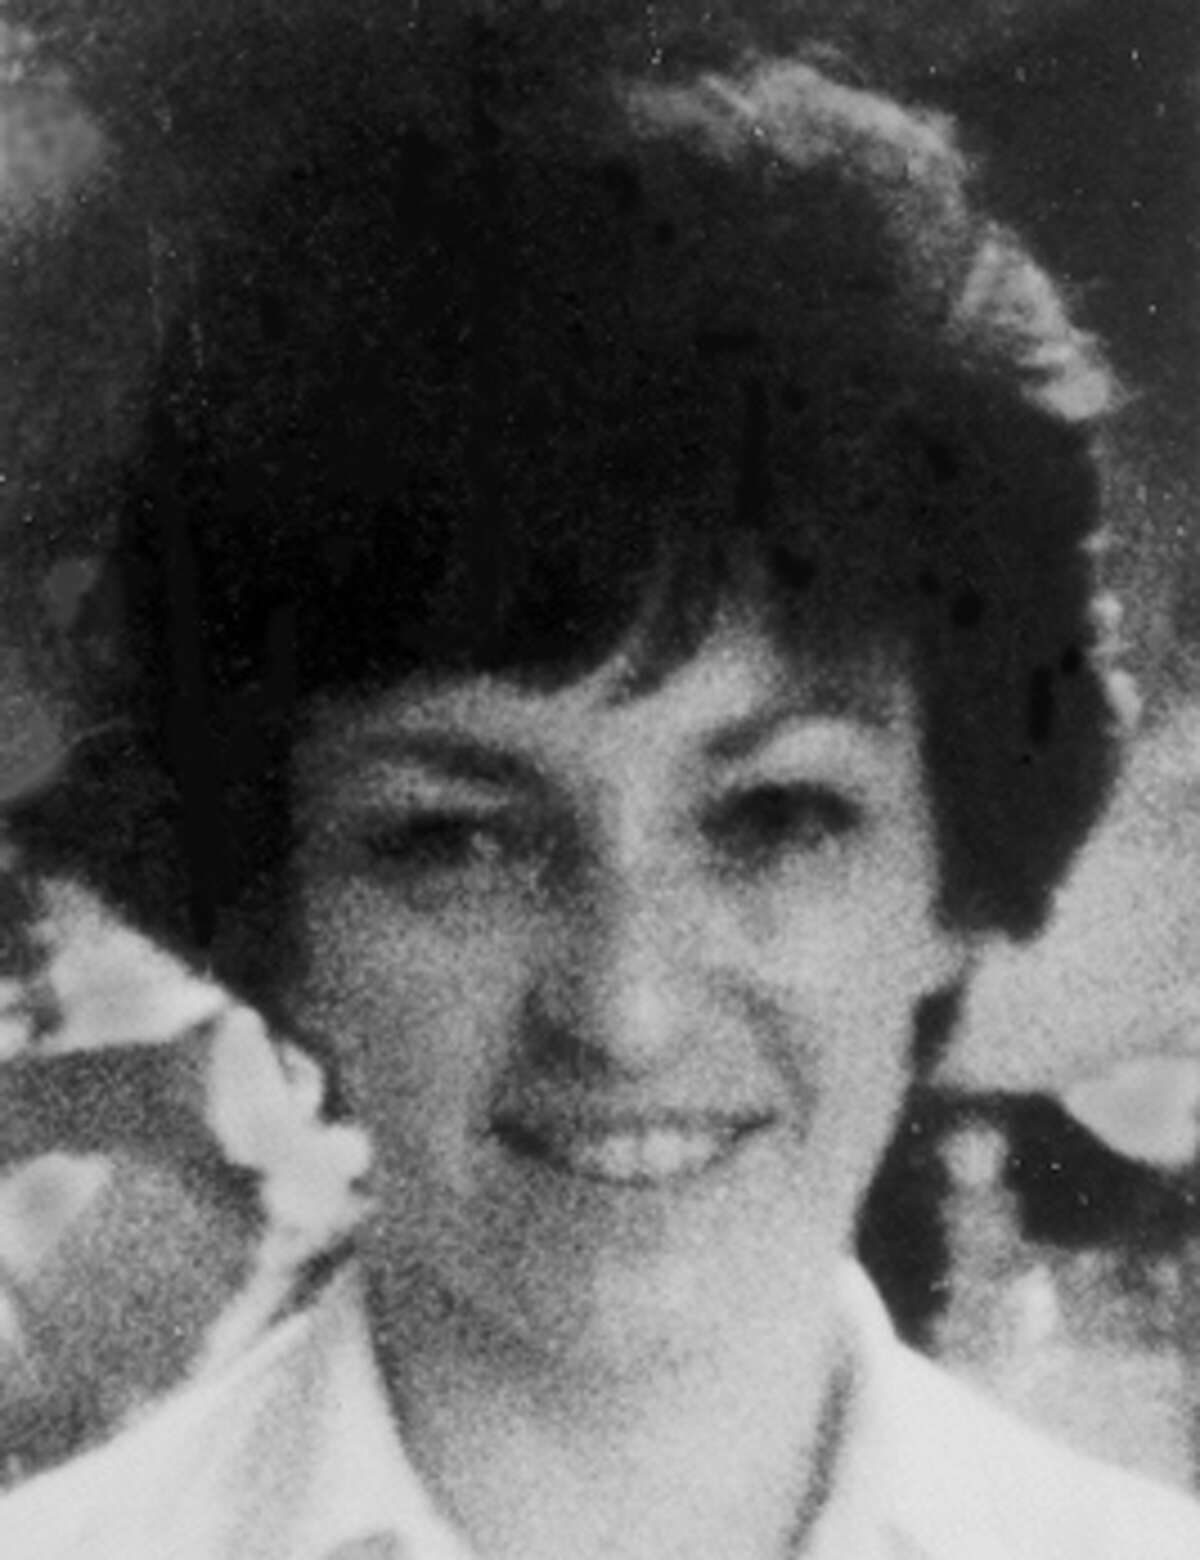 Jeanne Marie Scrima, a 44-year-old mother of four, left her boyfriend’s Erie, Penn., home on March 19, 1980, and never returned to her Knox farmhouse. Her vehicle was spotted in Montgomery County weeks later and eventually found. Scrima was in the midst of a divorce when she vanished. Anyone with information is asked to call the State Police.